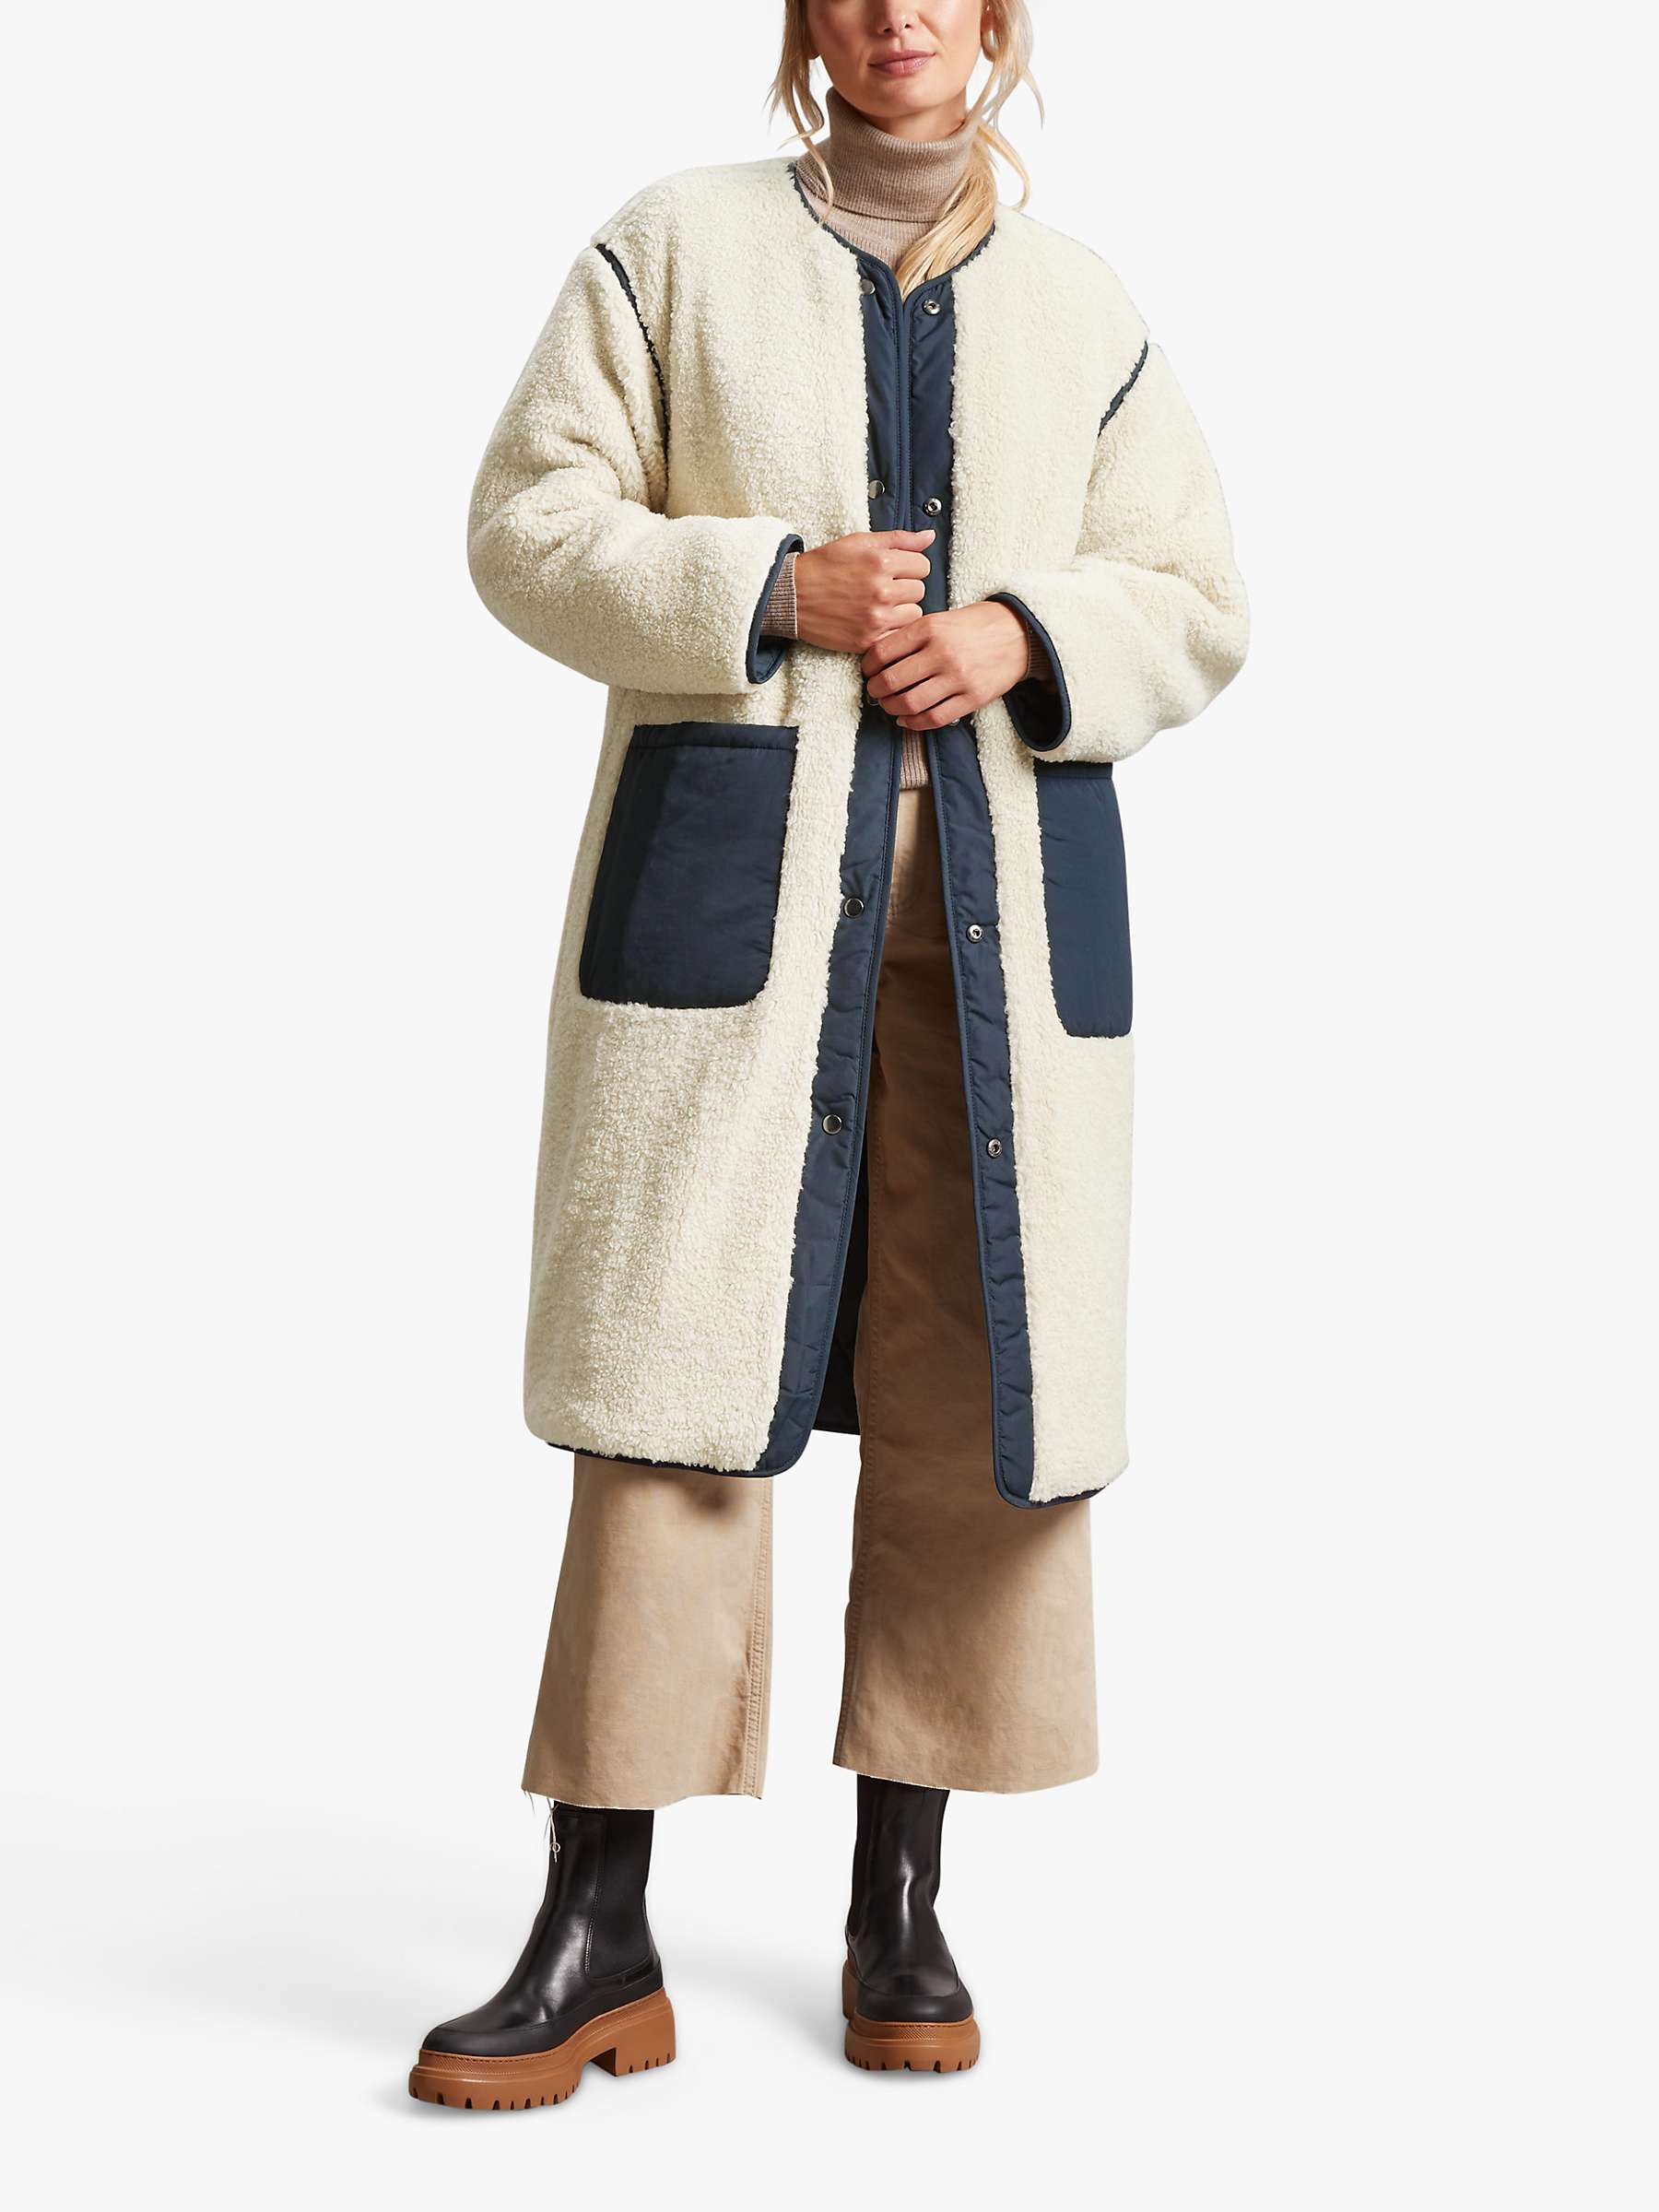 Buy Four Seasons Reversible Collarless Borg Quilted Coat, Navy Online at johnlewis.com